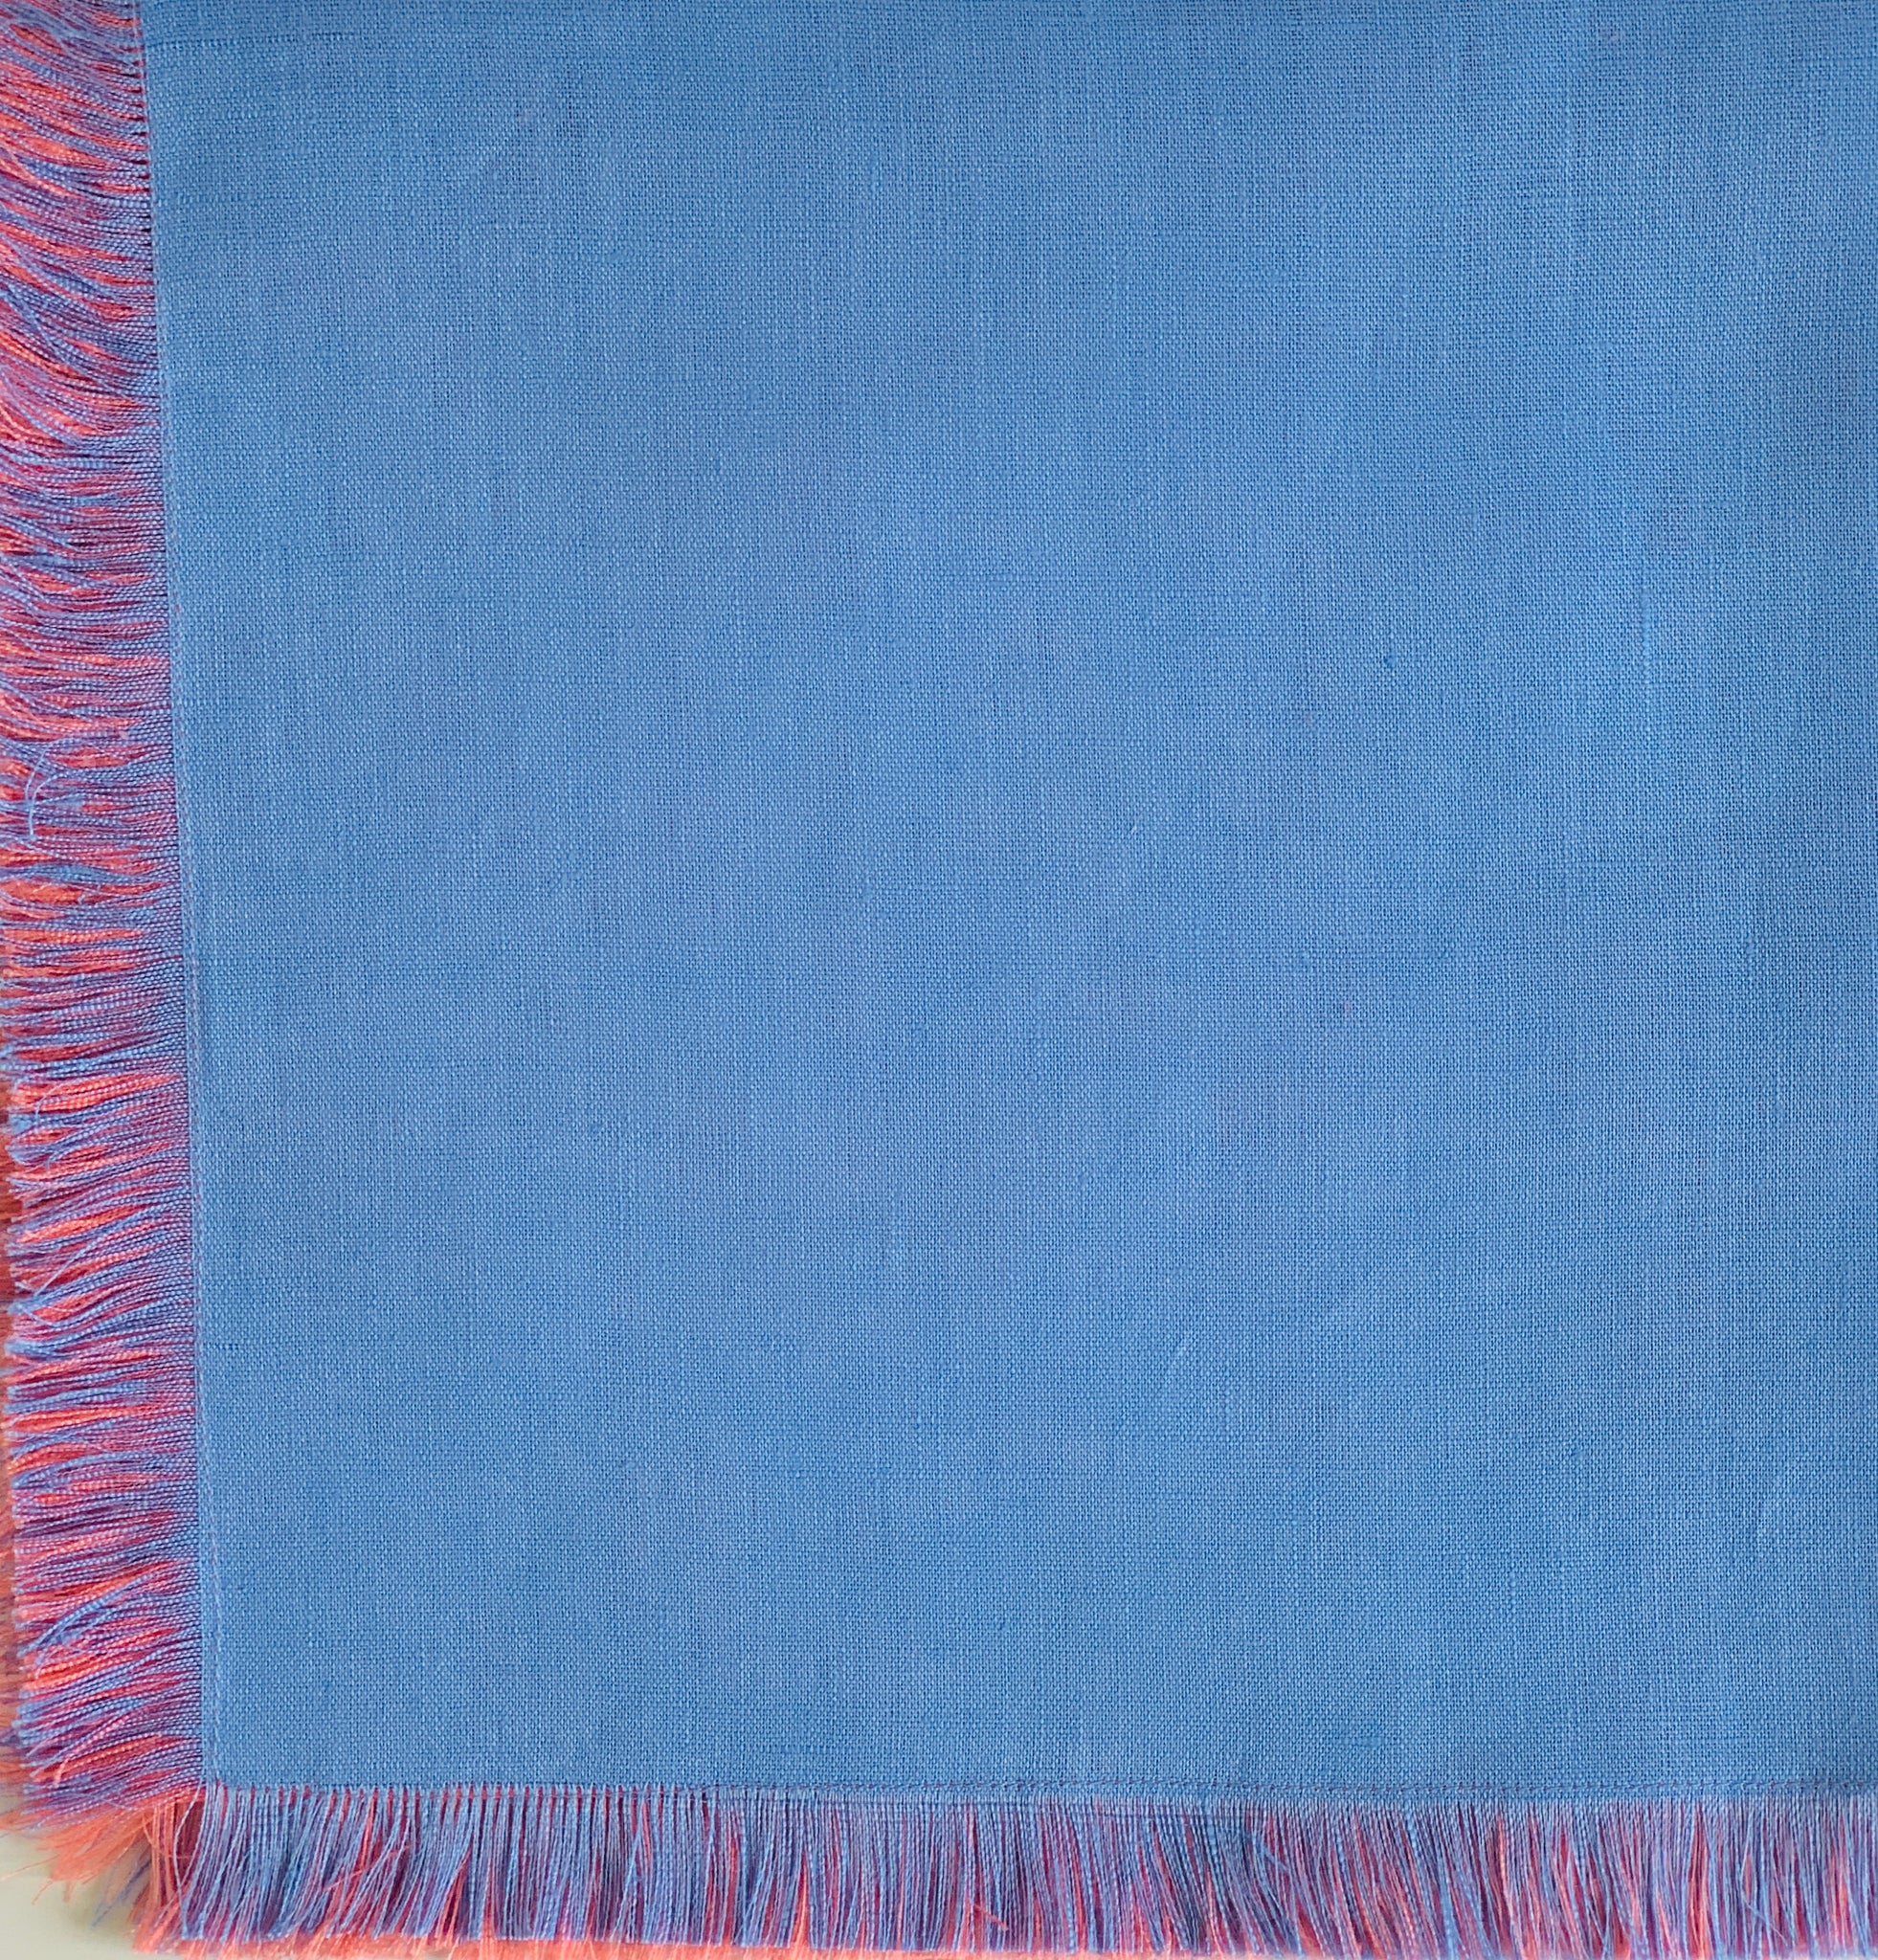 Reversible Blue and Coral Napkin